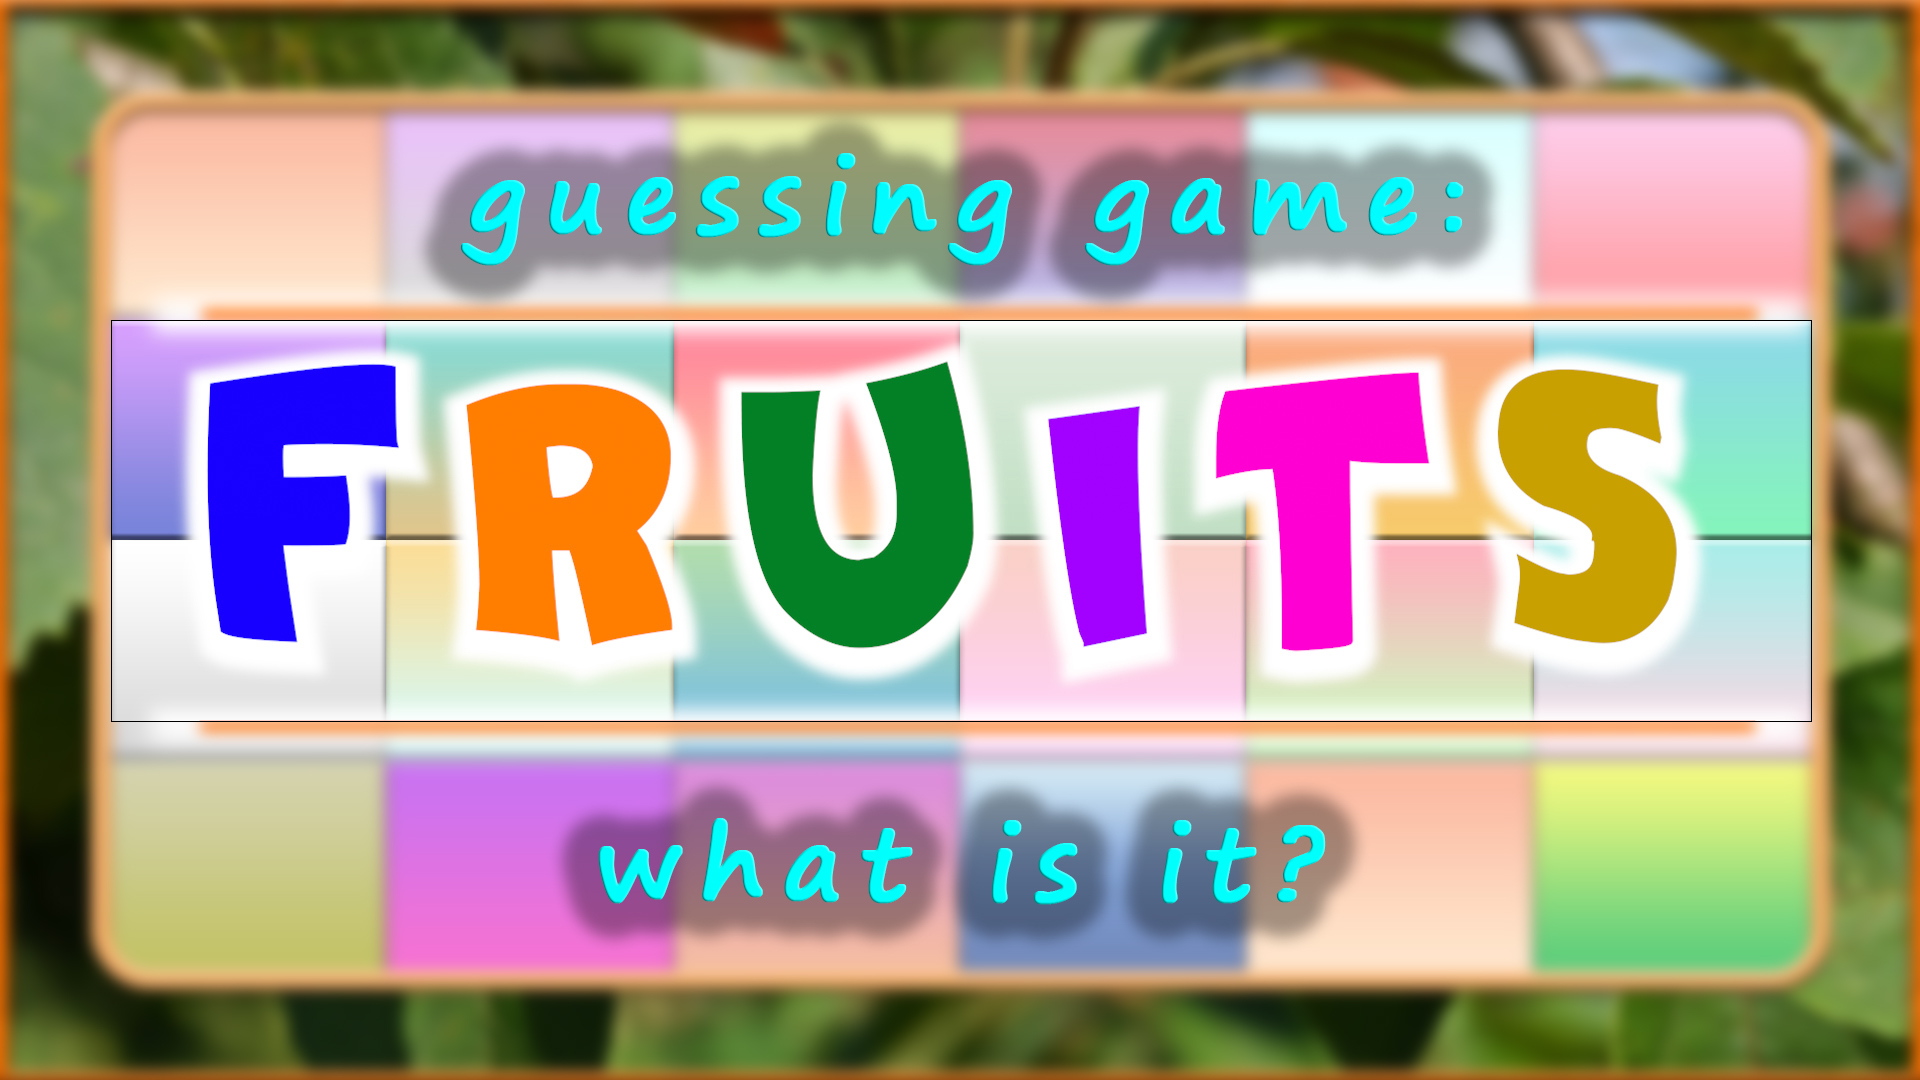 Fruits - Guessing game. What is it? Игра - Угадай, что за фрукт.